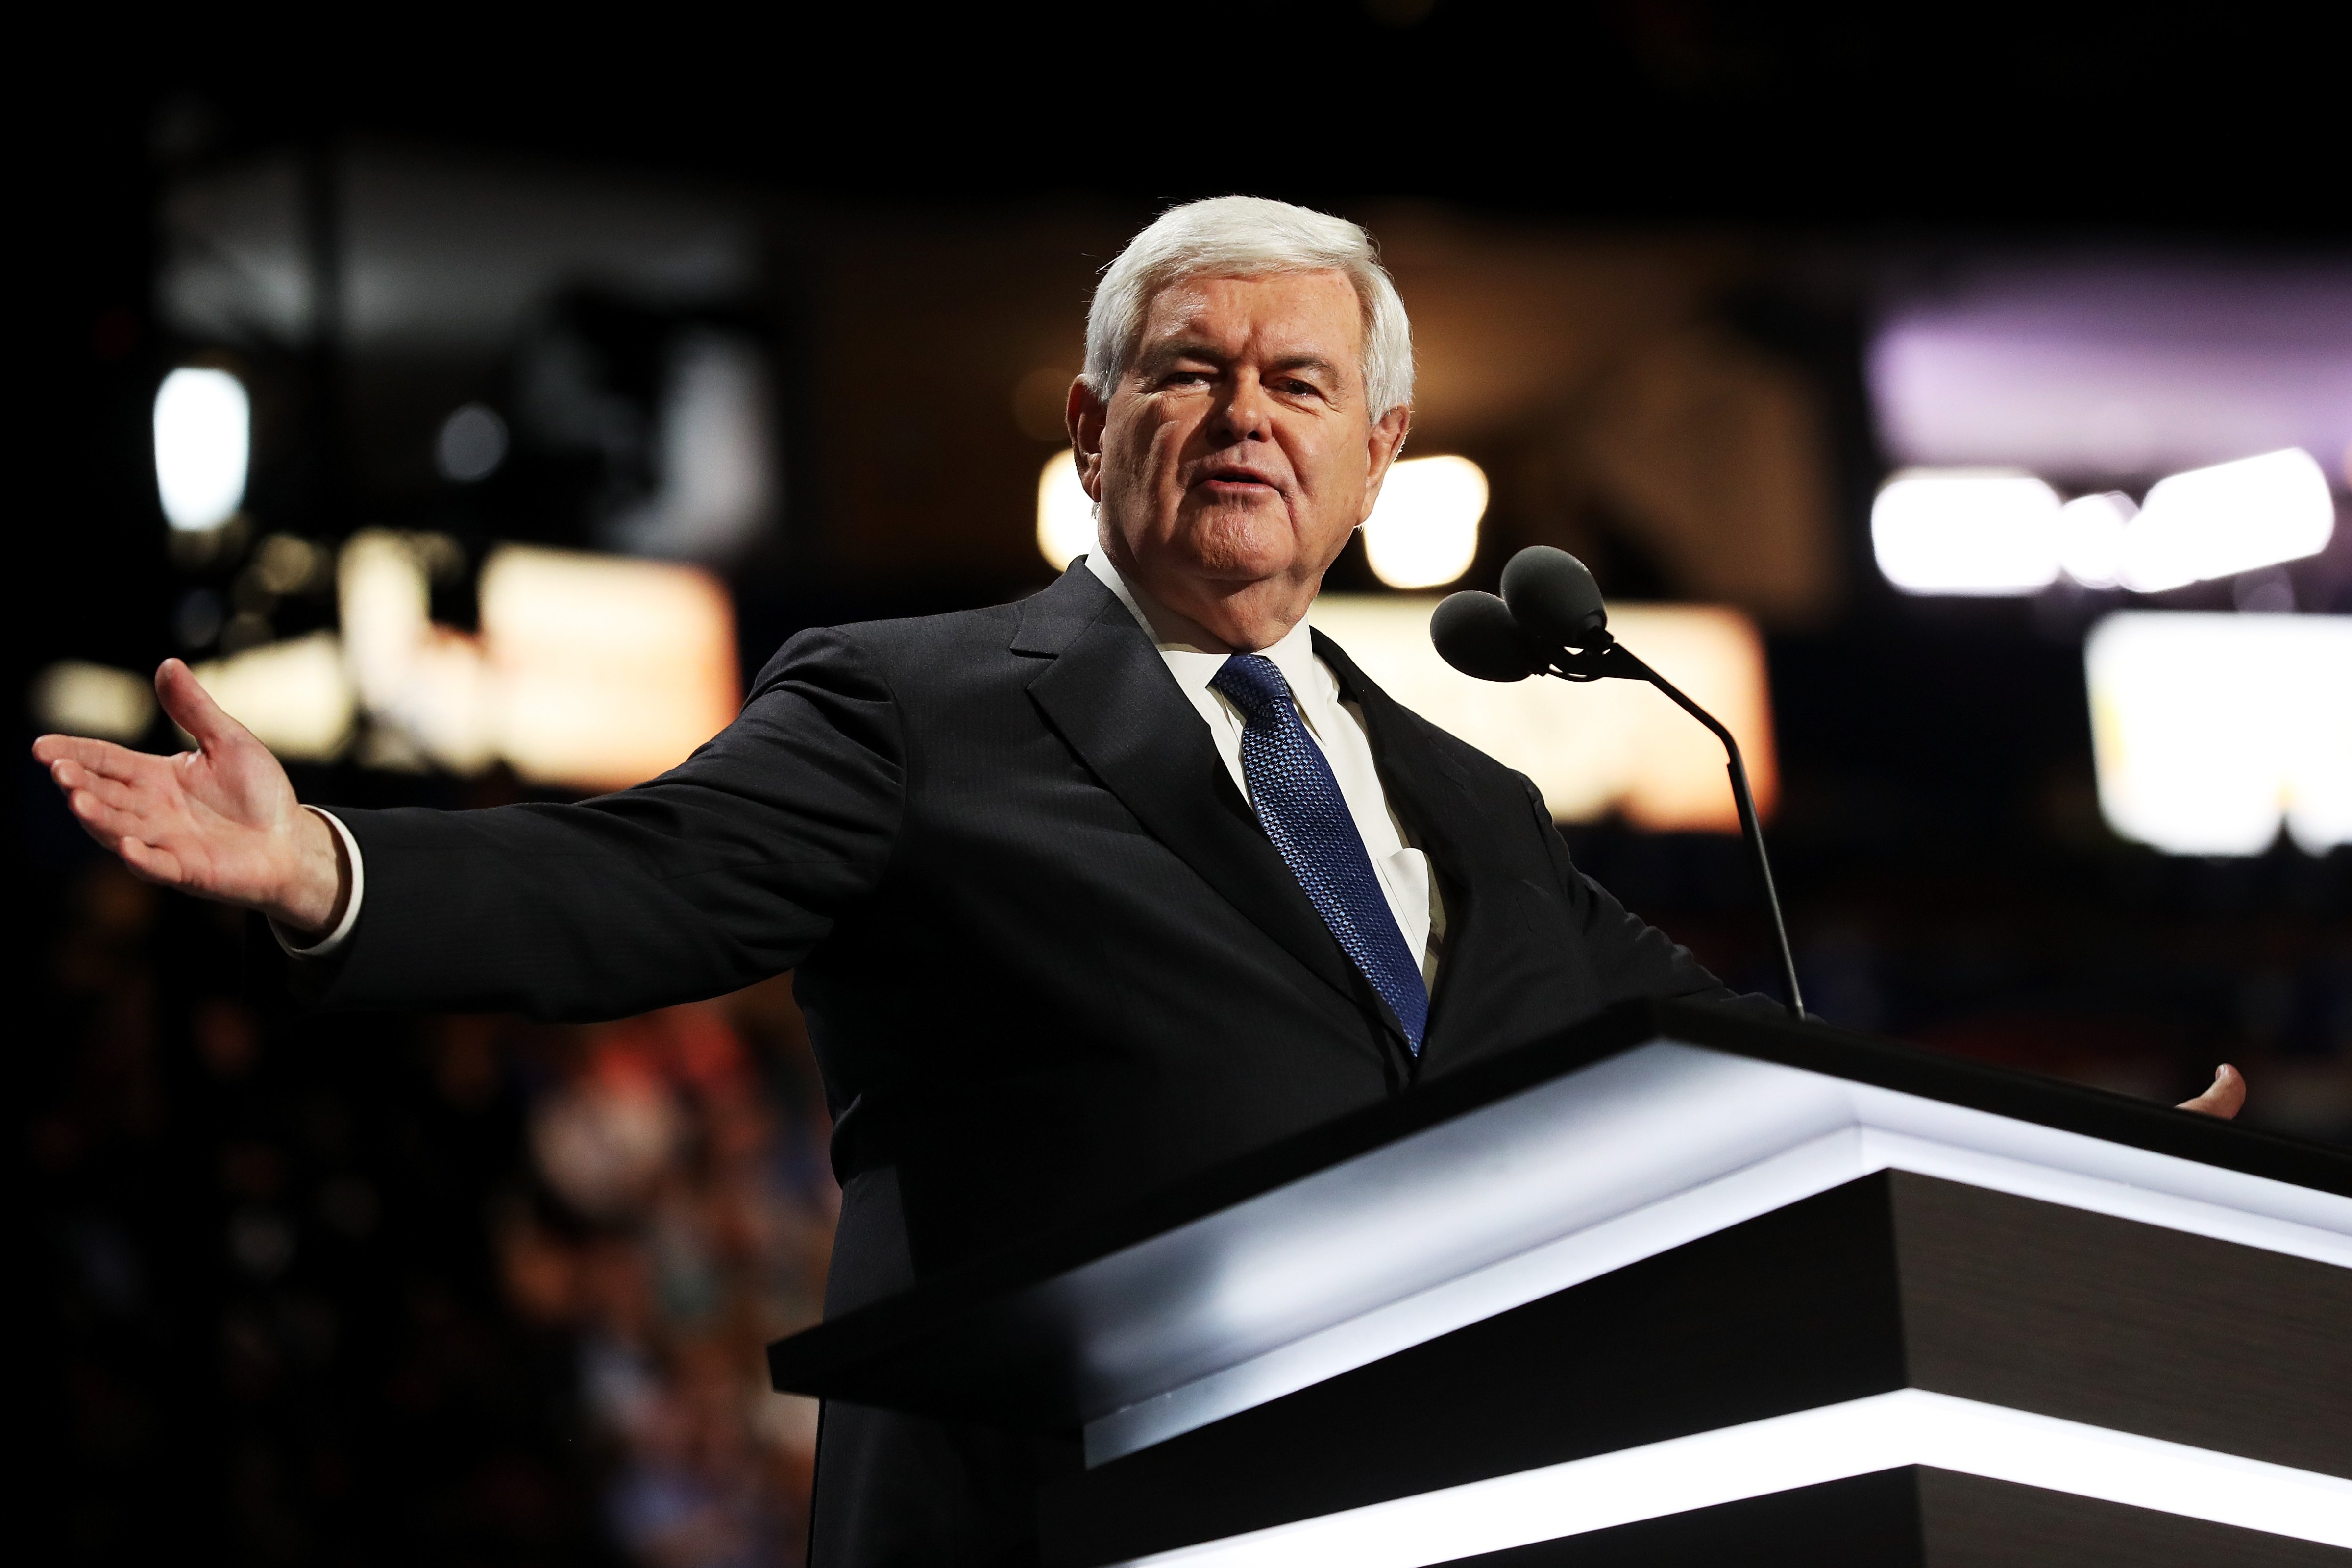 Former Speaker of the House Newt Gingrich delivers a speech on the third day of the Republican National Convention on July 20, 2016 at the Quicken Loans Arena in Cleveland, Ohio. (John Moore/Getty Images)